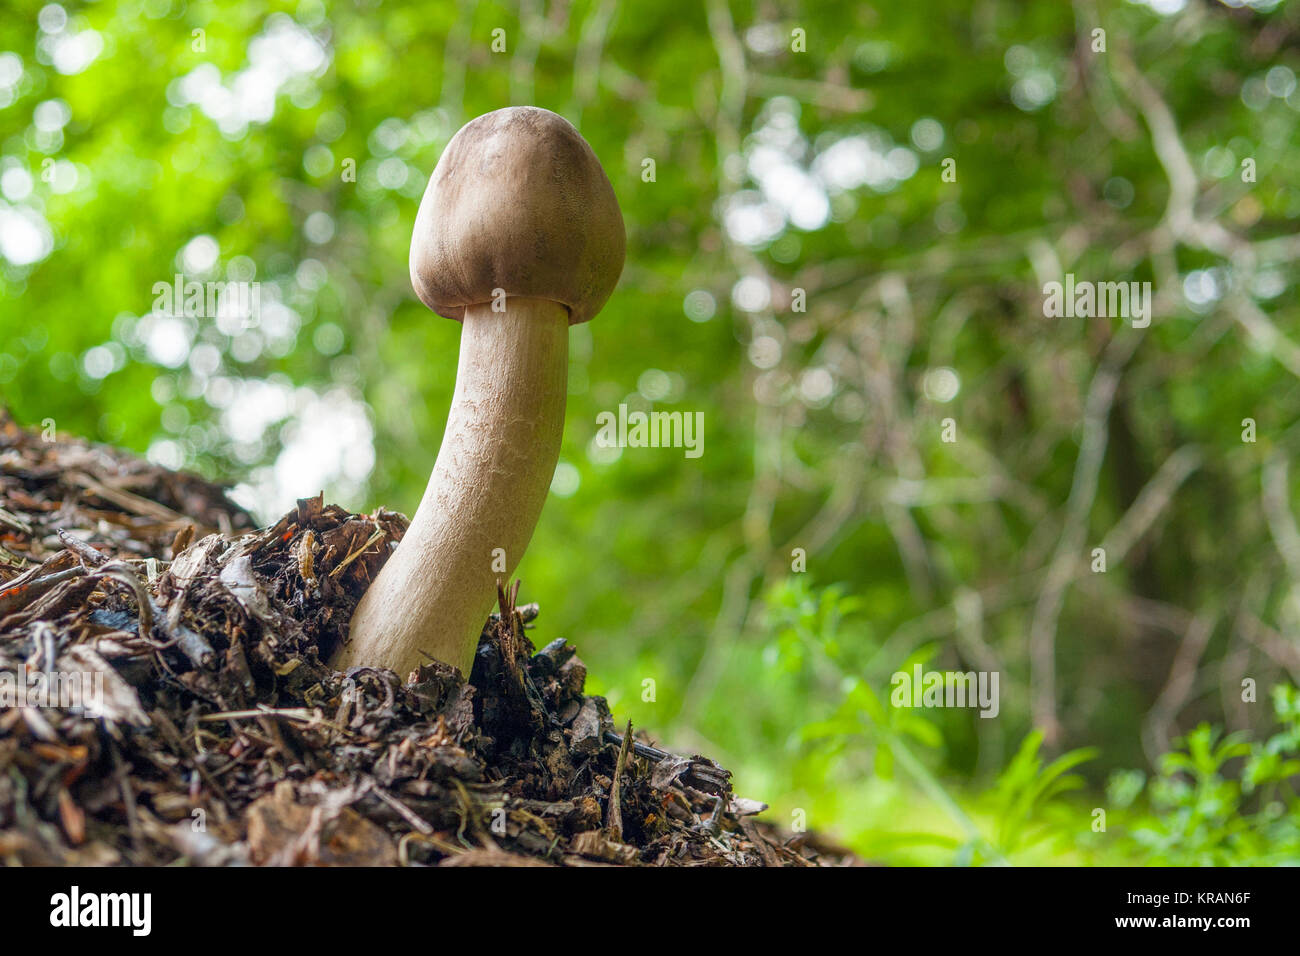 mushroom in natural ambiance Stock Photo